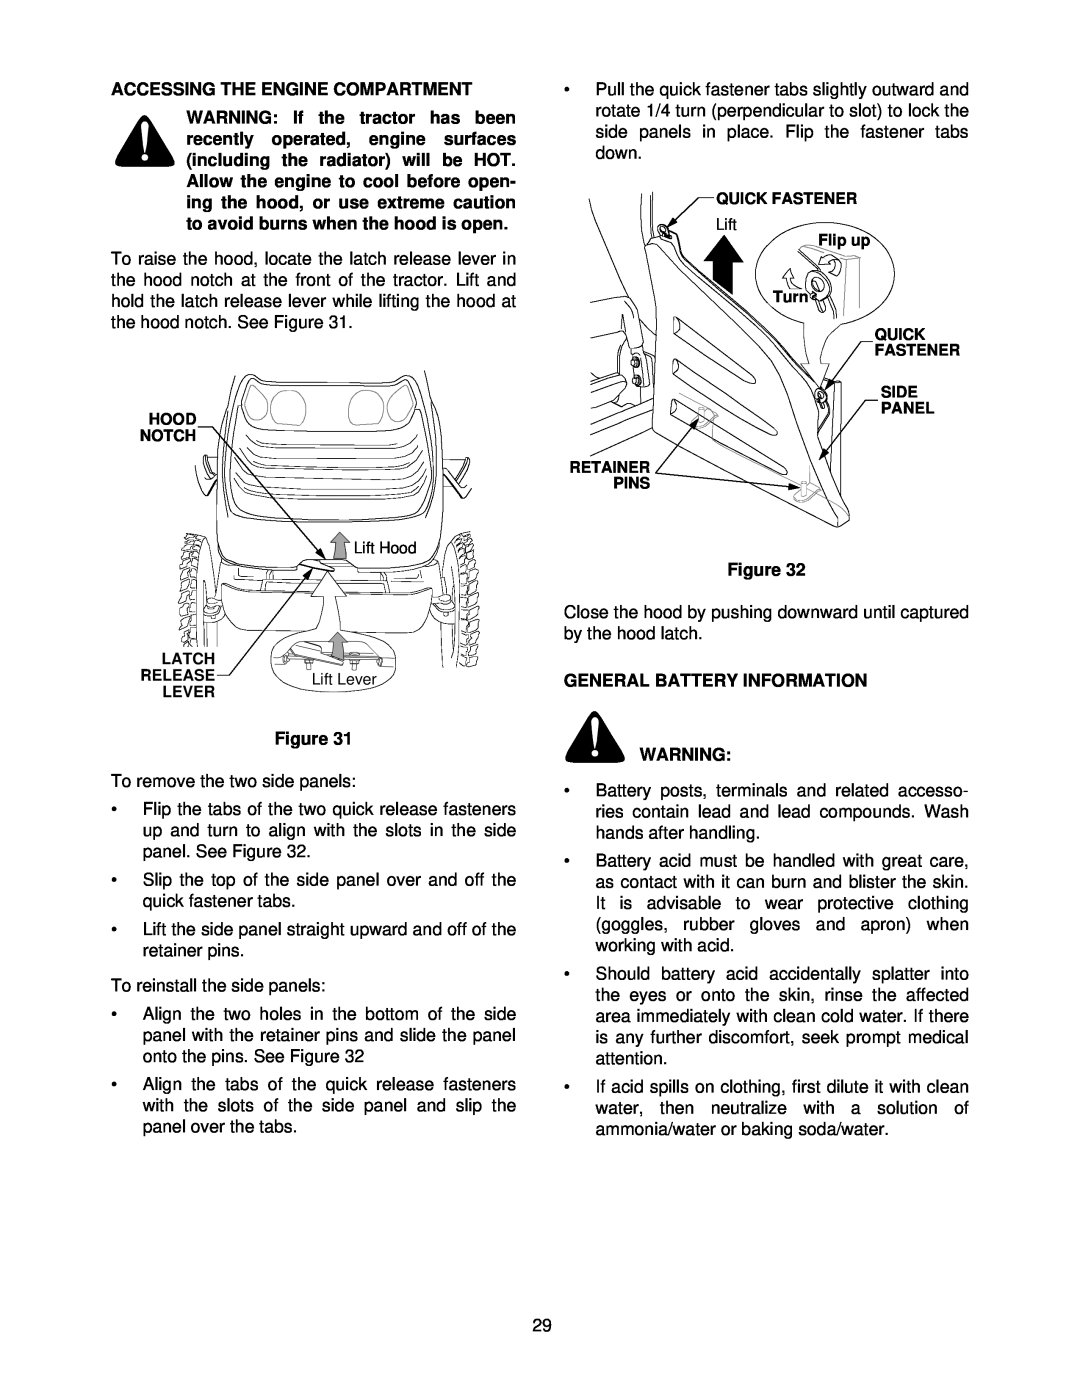 Cub Cadet 7252 manual Accessing The Engine Compartment, General Battery Information 